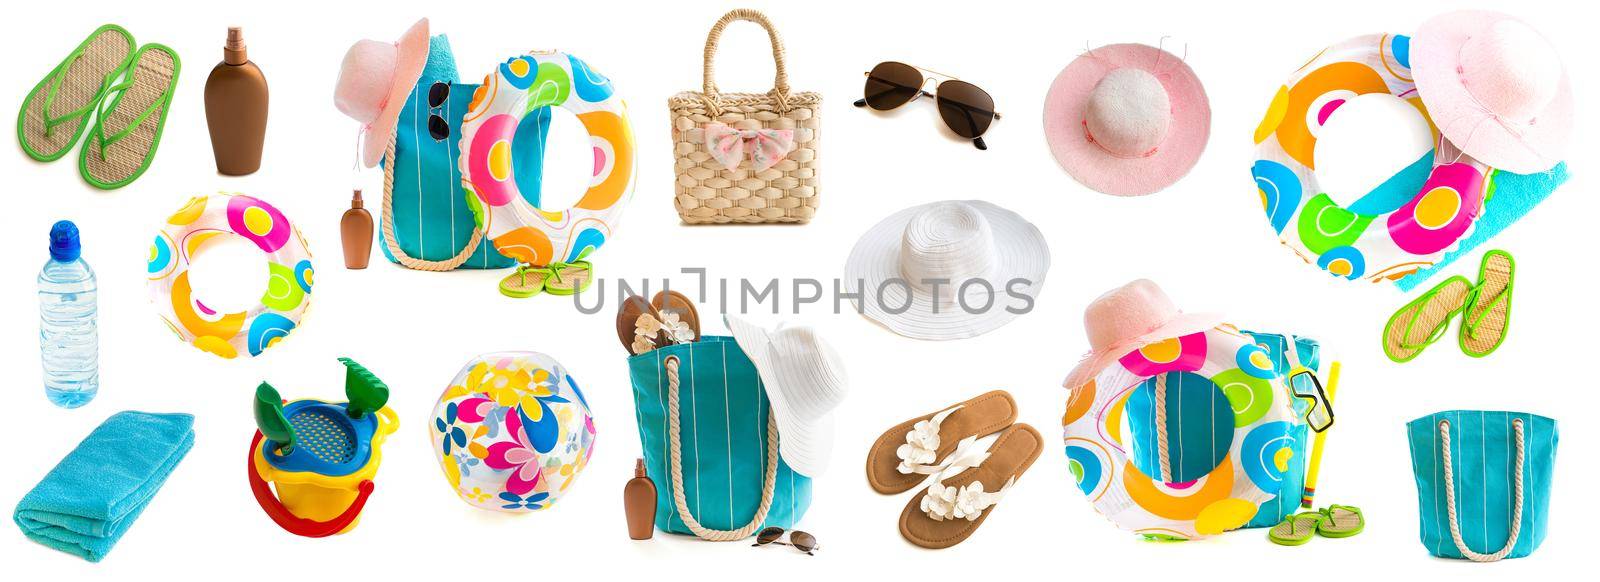 Photo collage of beach accessories and toys isolated on a white background